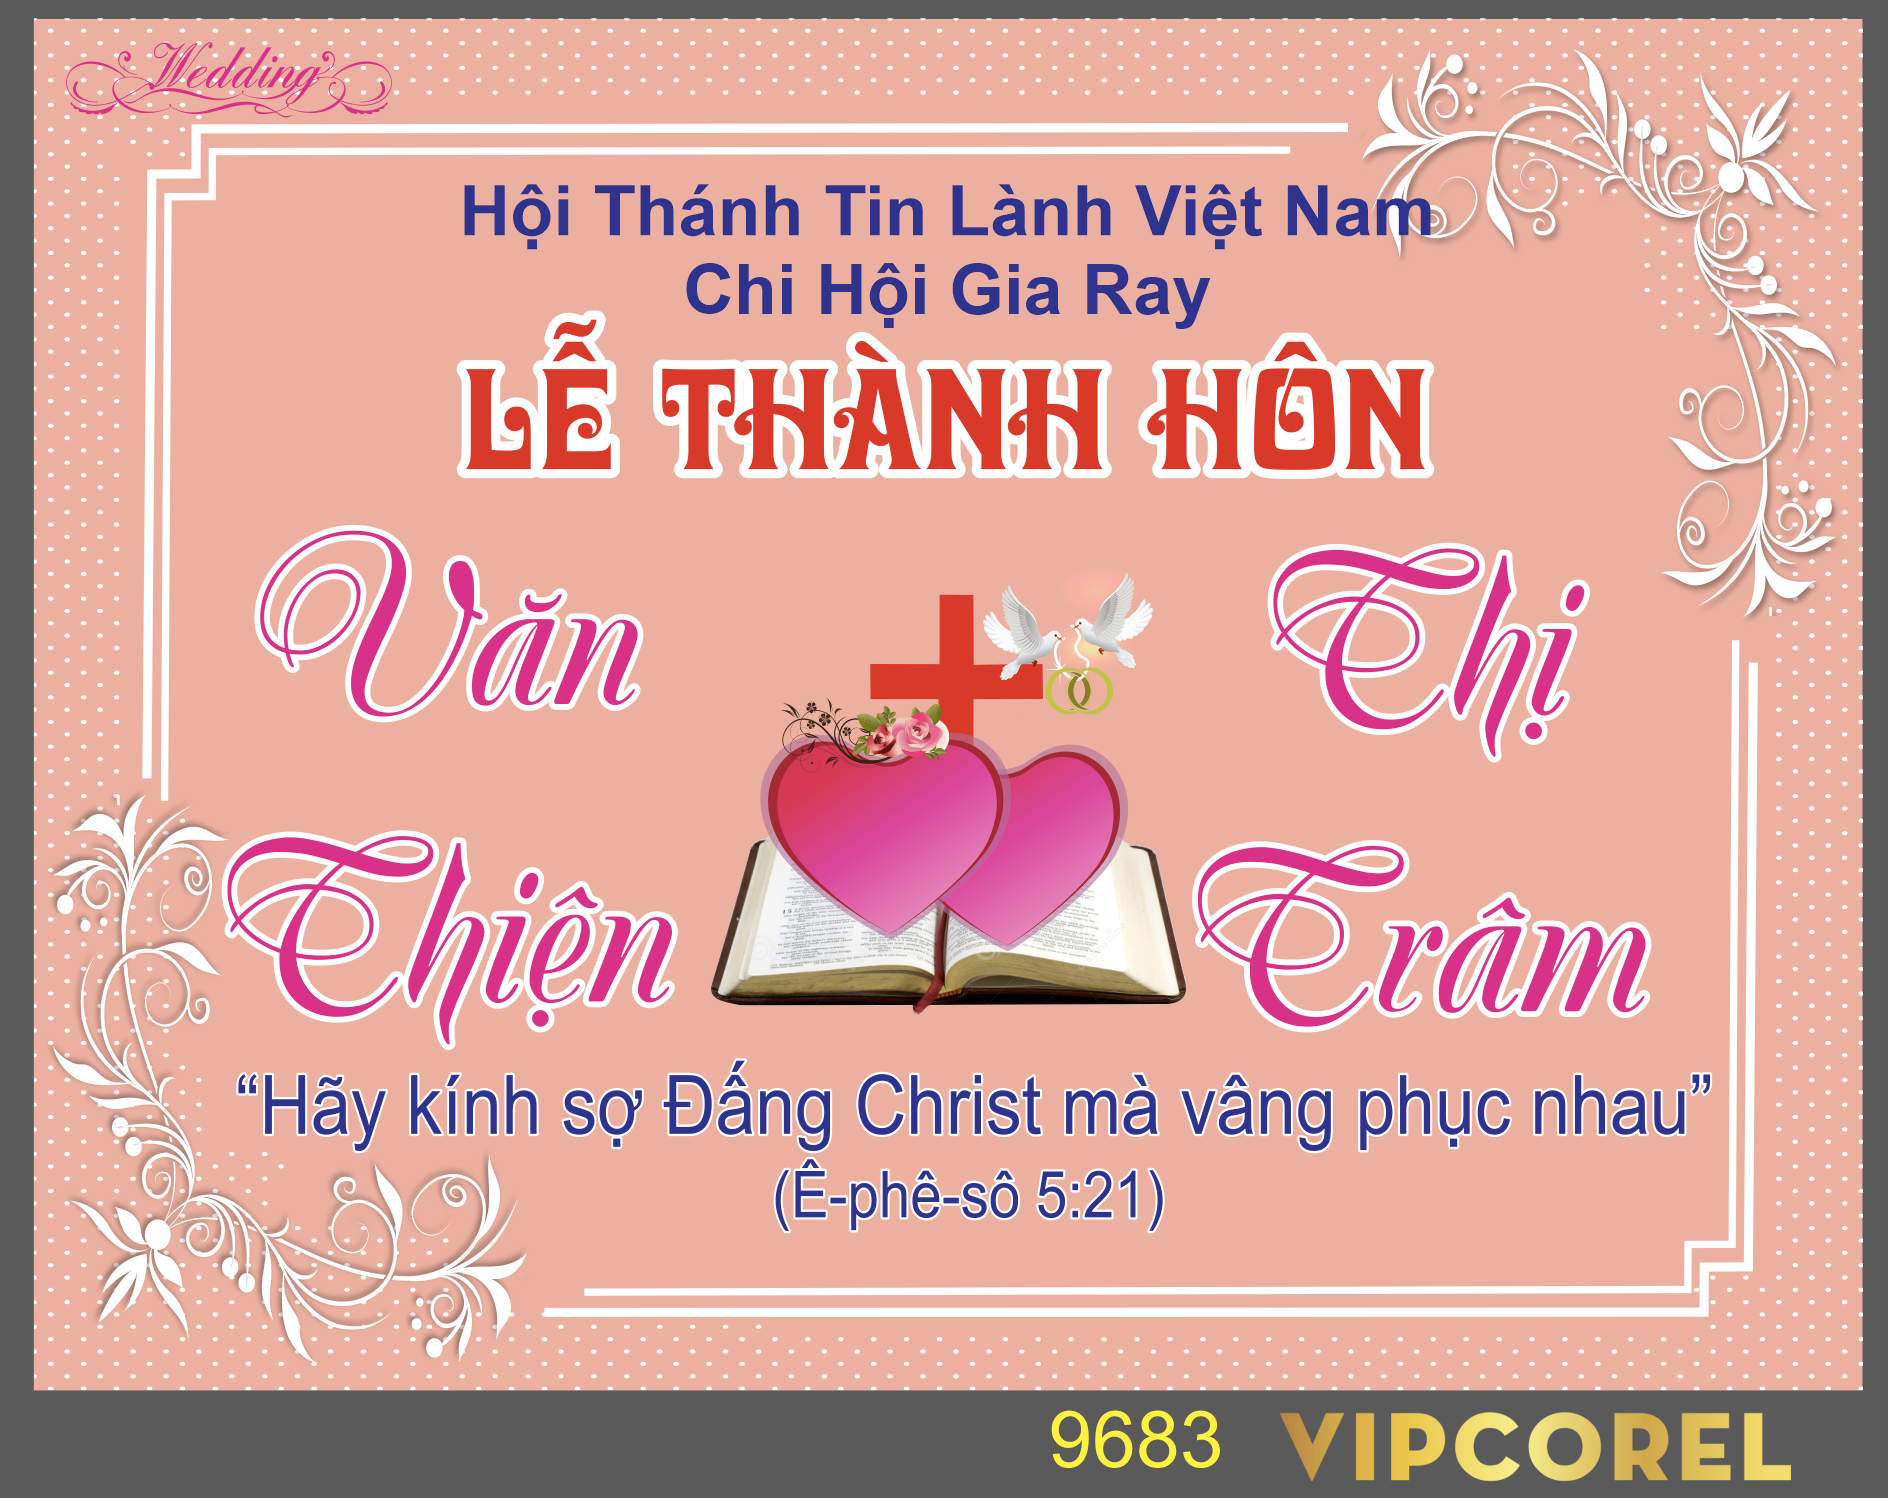 le thanh hon van thien - chi tram dao cong giao.png